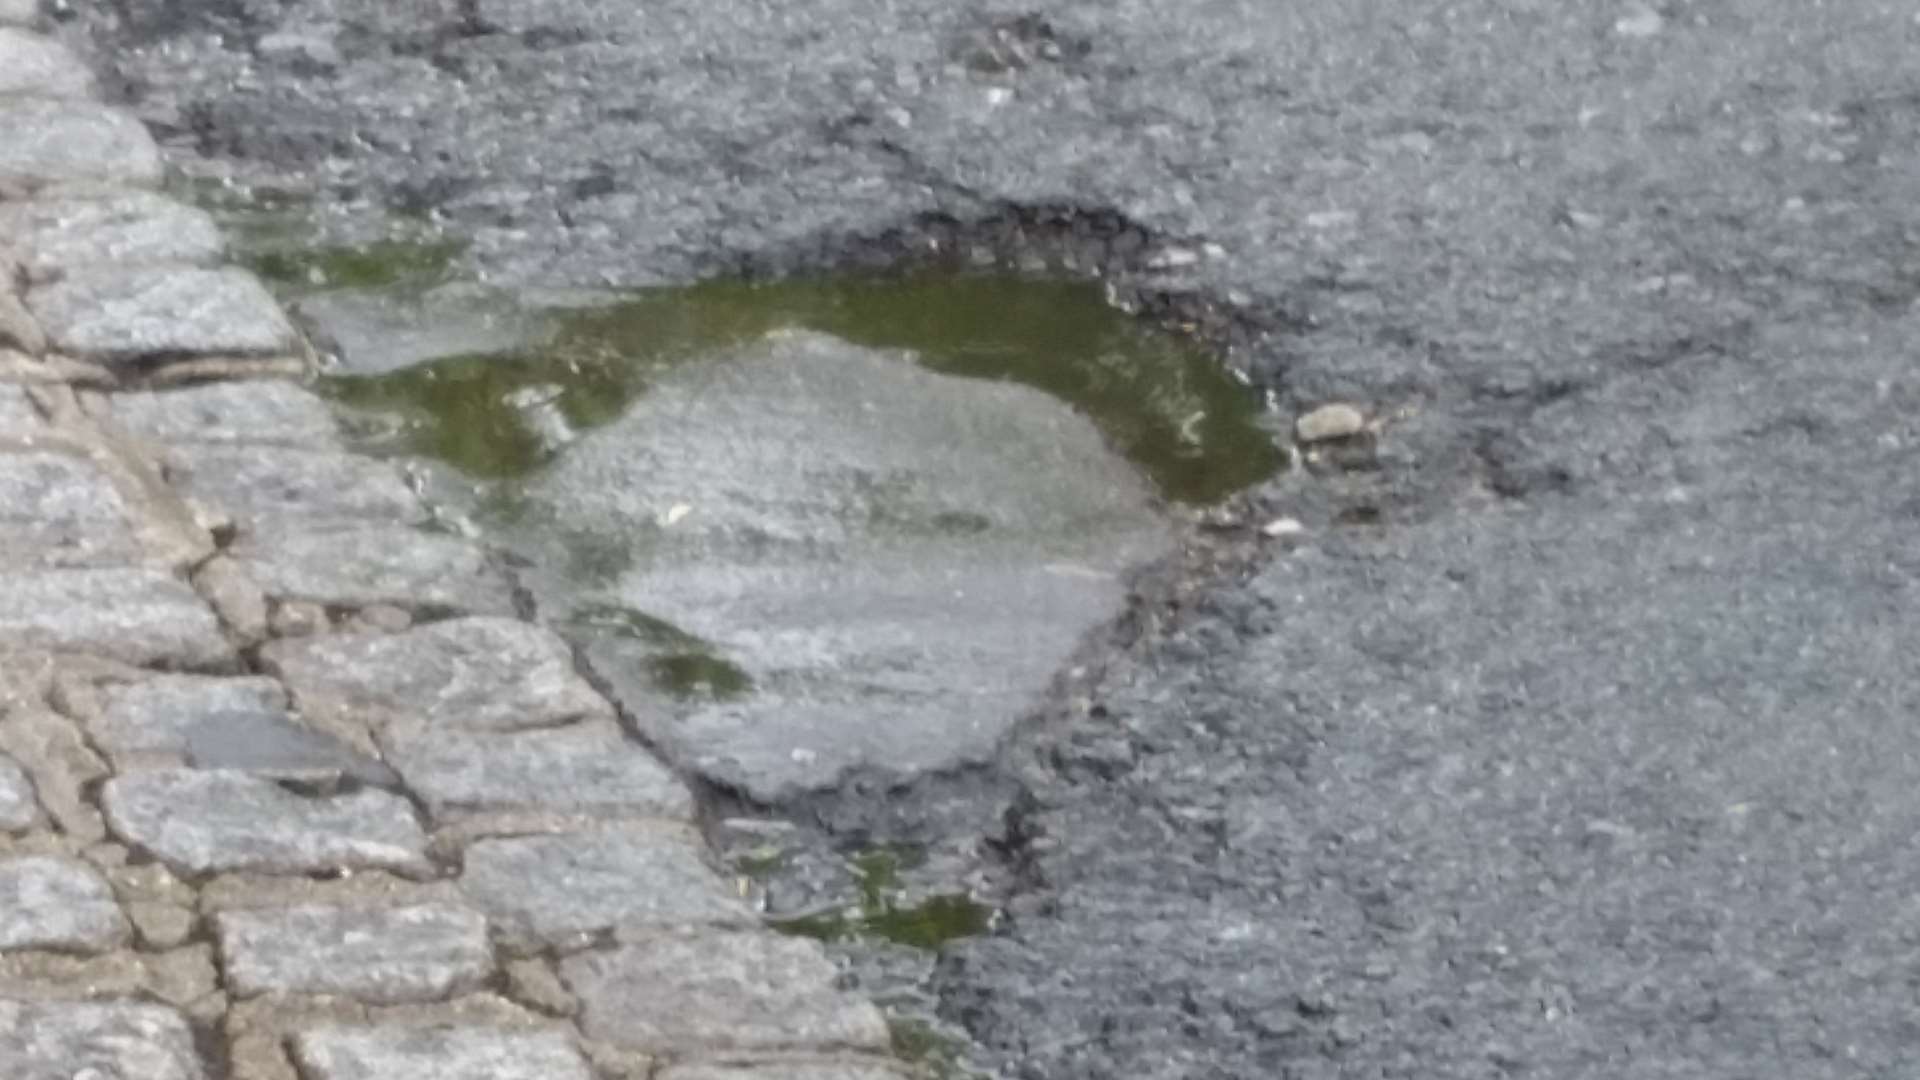 Fran tripped over this pothole in Herne Bay